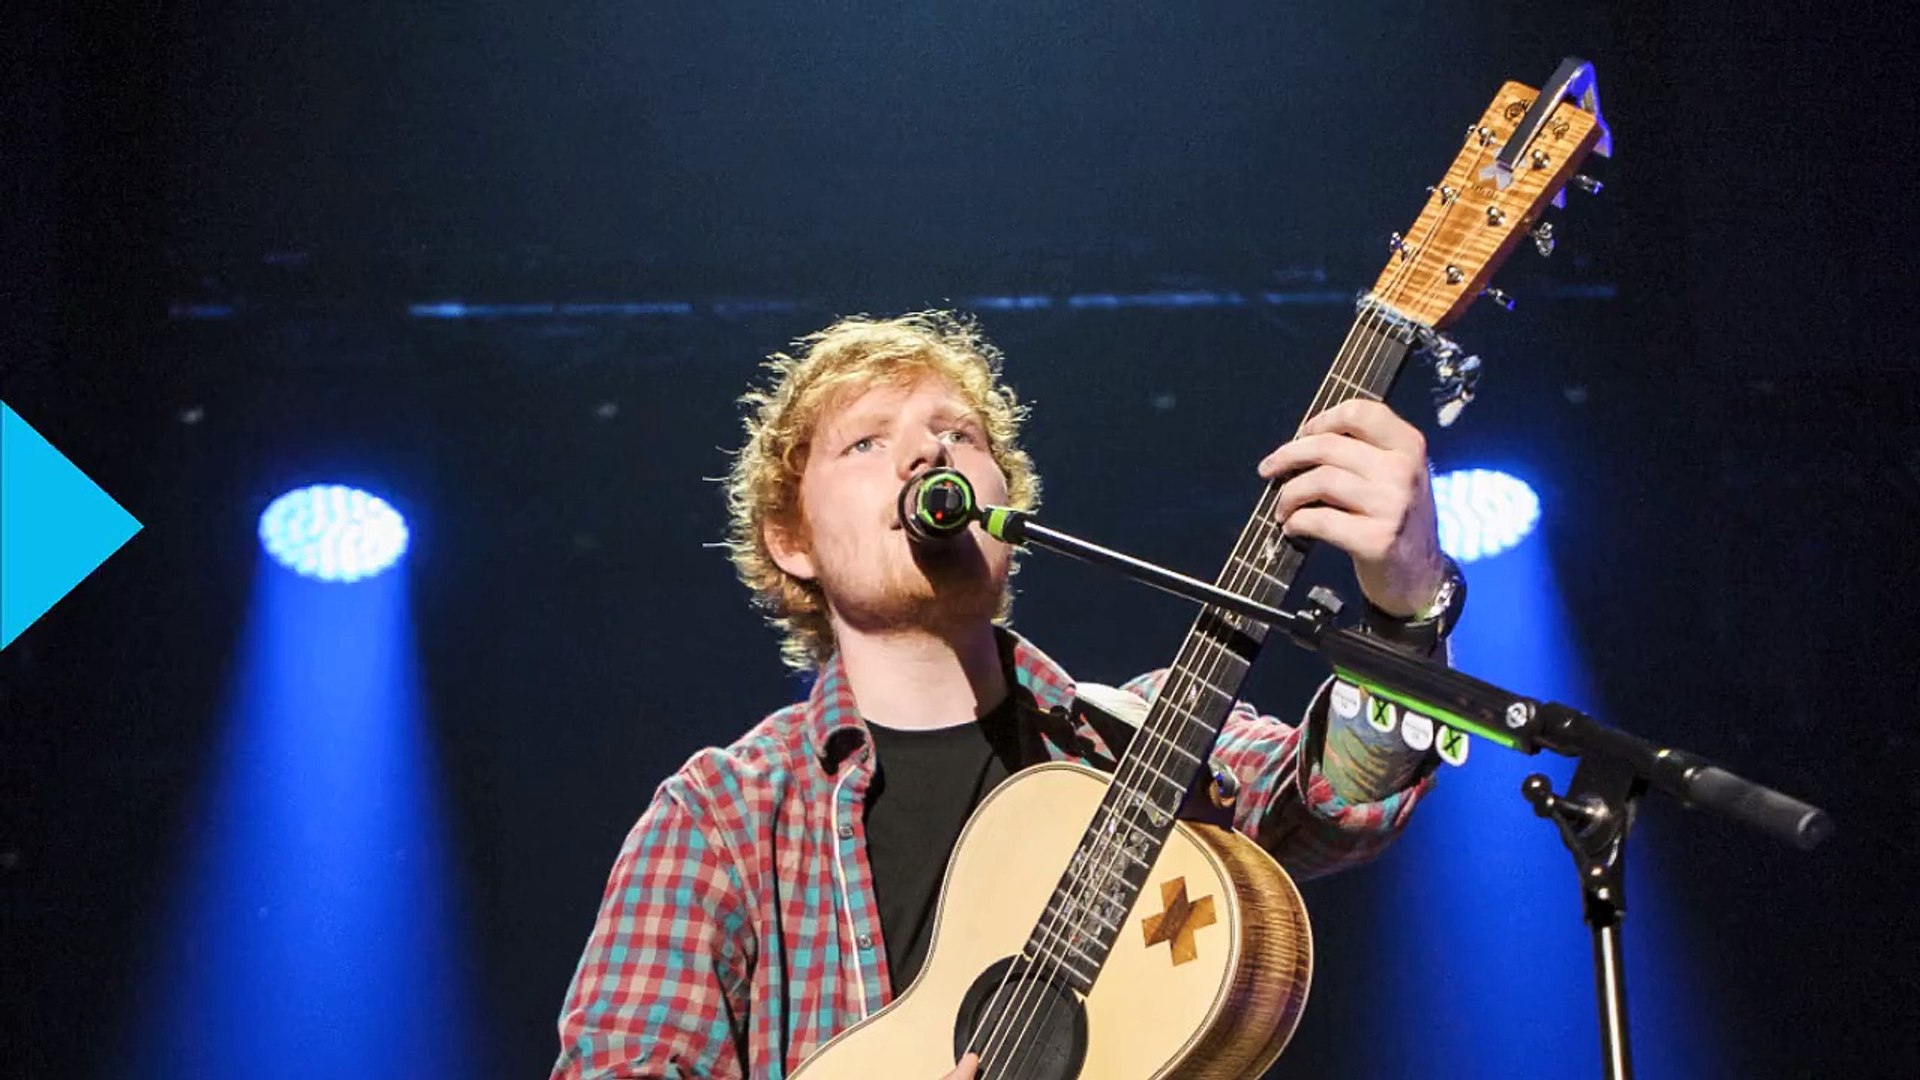 Ed Sheeran to Welcome Back 'VH1 Storytellers' With Personal, Live Concert